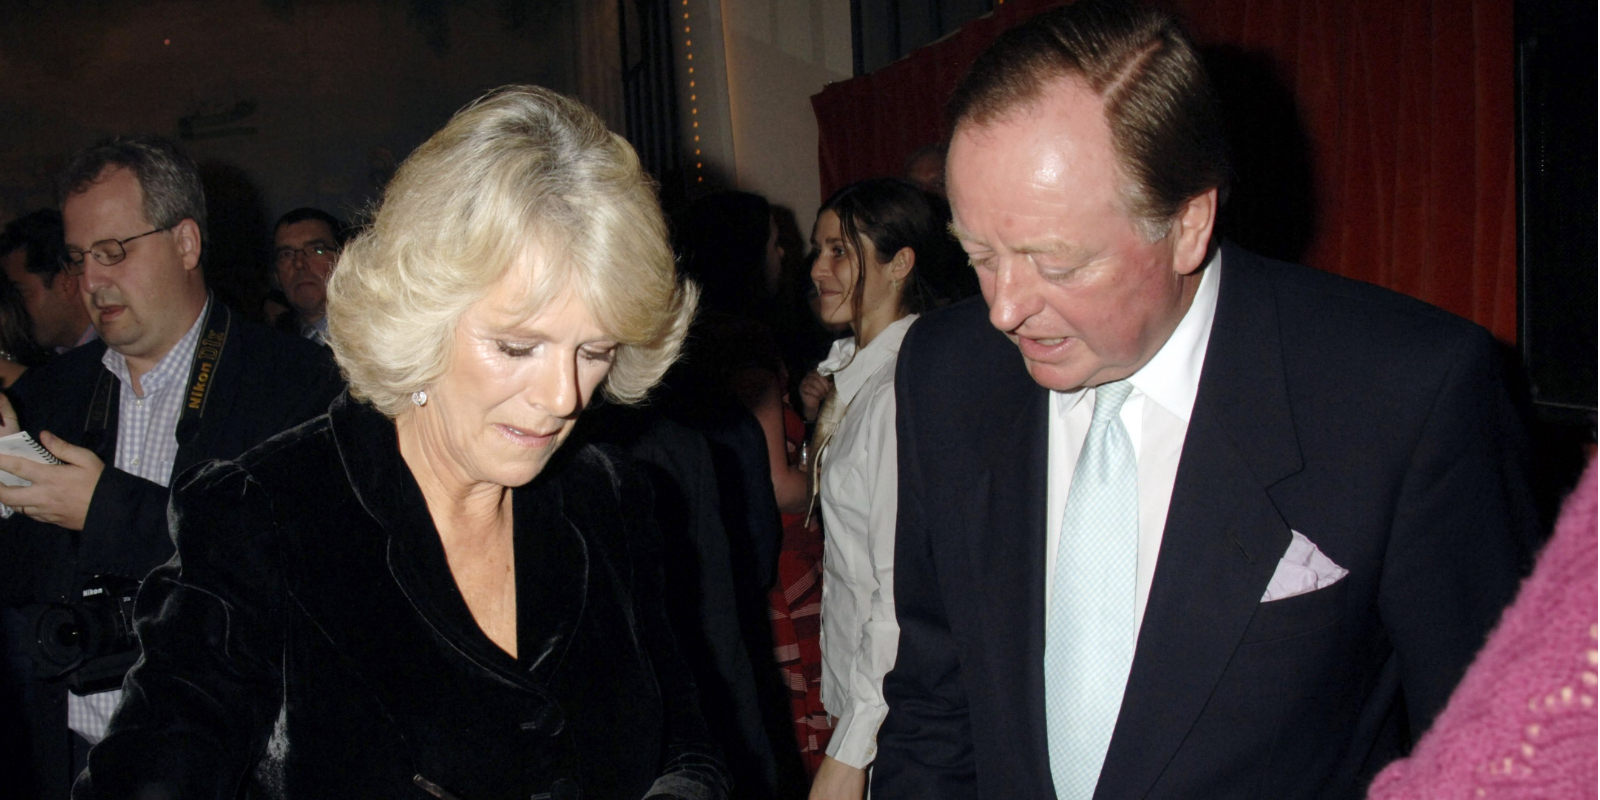 Camilla, Duchess of Cornwall and Andrew Parker Bowles attend the book launch 